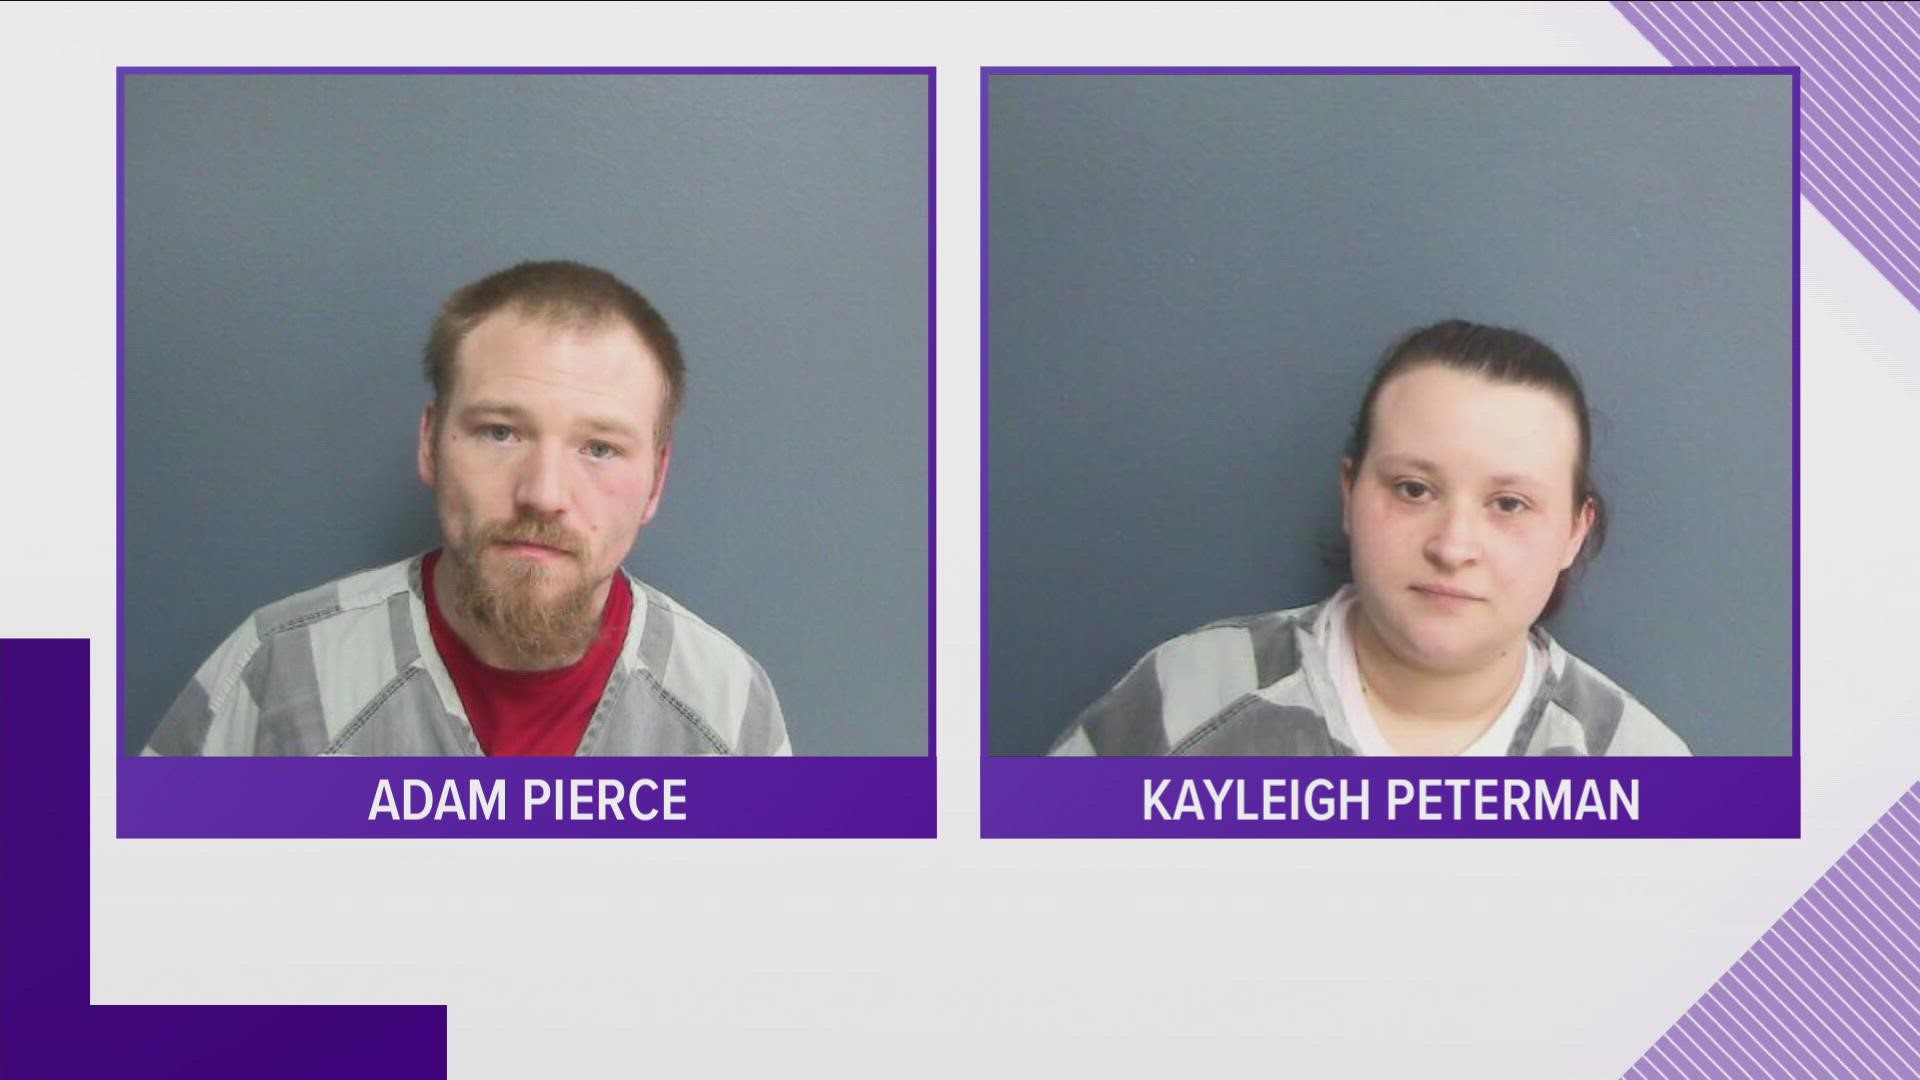 Kayleigh Peterman and Adam Pierce face a charge of aggravated child abuse or neglect.